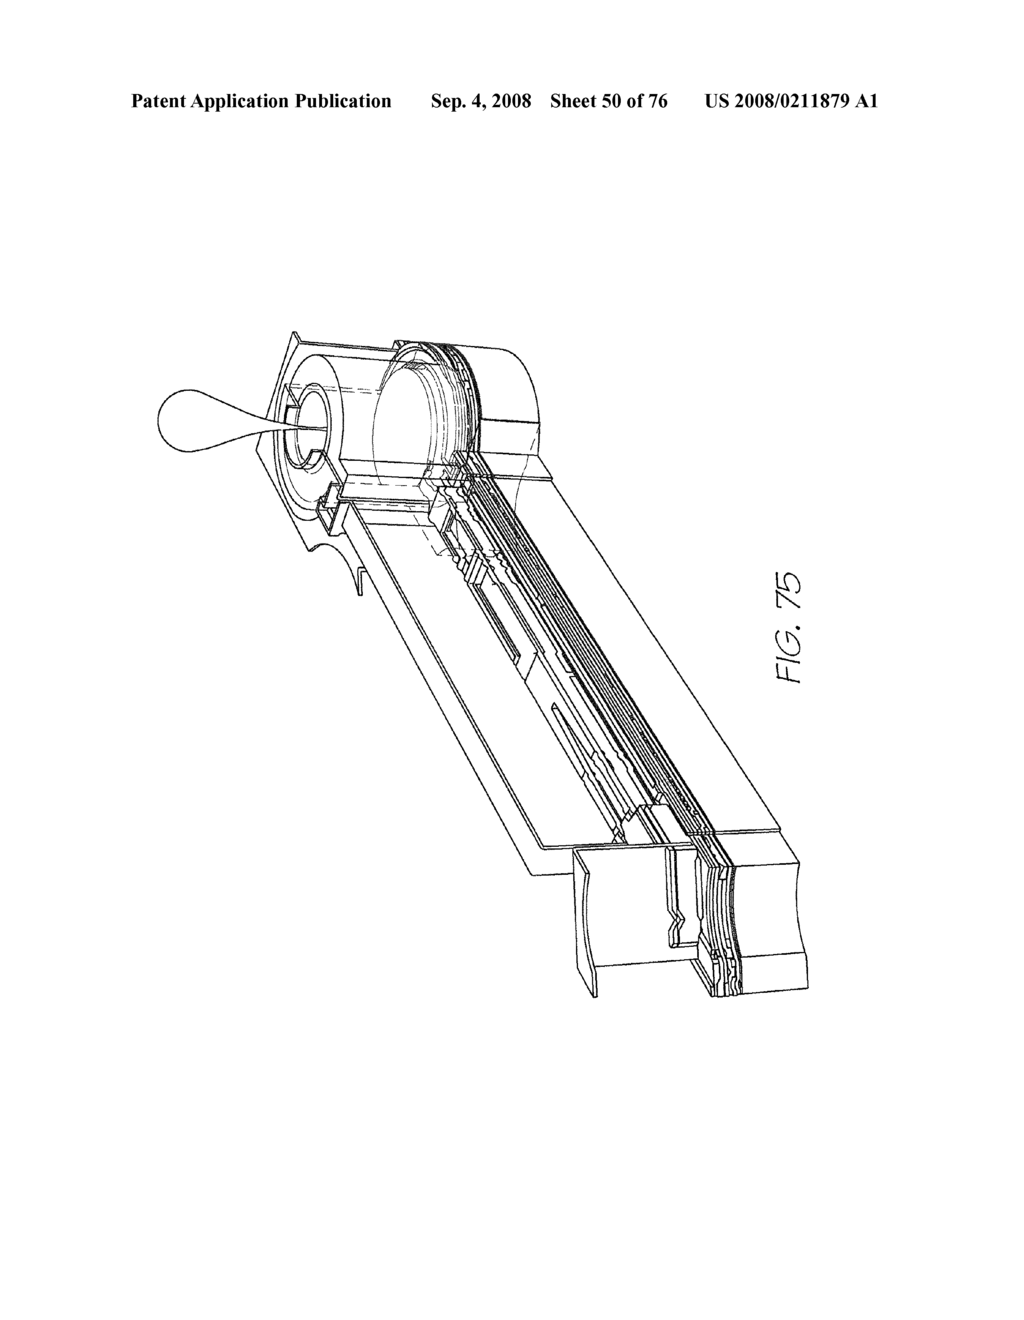 Pagewidth inkjet printhead assembly with nozzle arrangements having actuator arms configured to be in thermal balance when in a quiescent state - diagram, schematic, and image 51